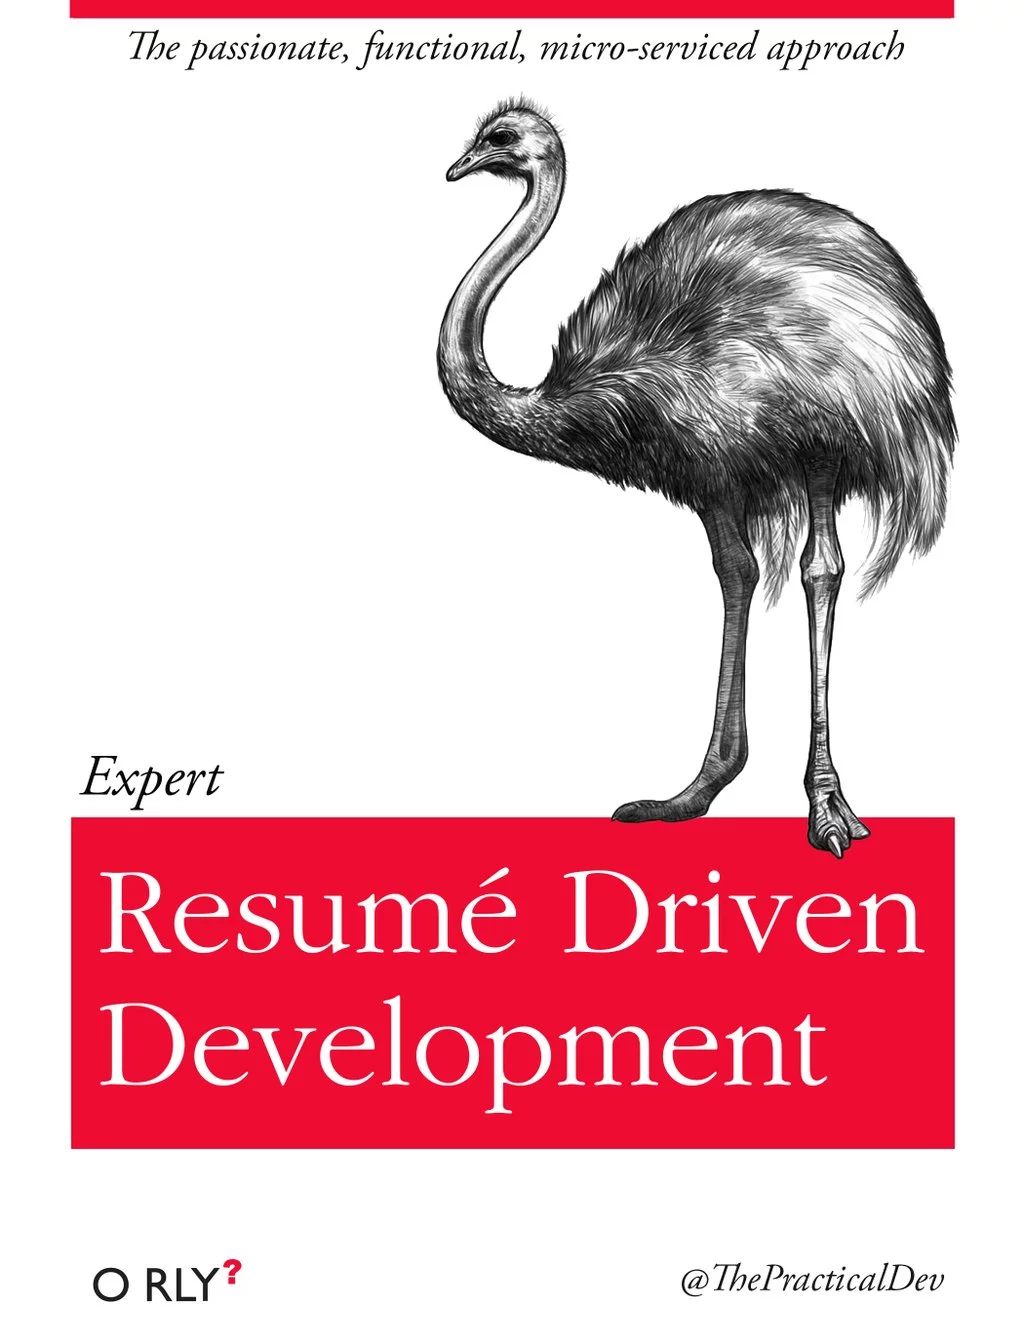 Resume Driven Development | The passionate, functional, micro-serviced approach